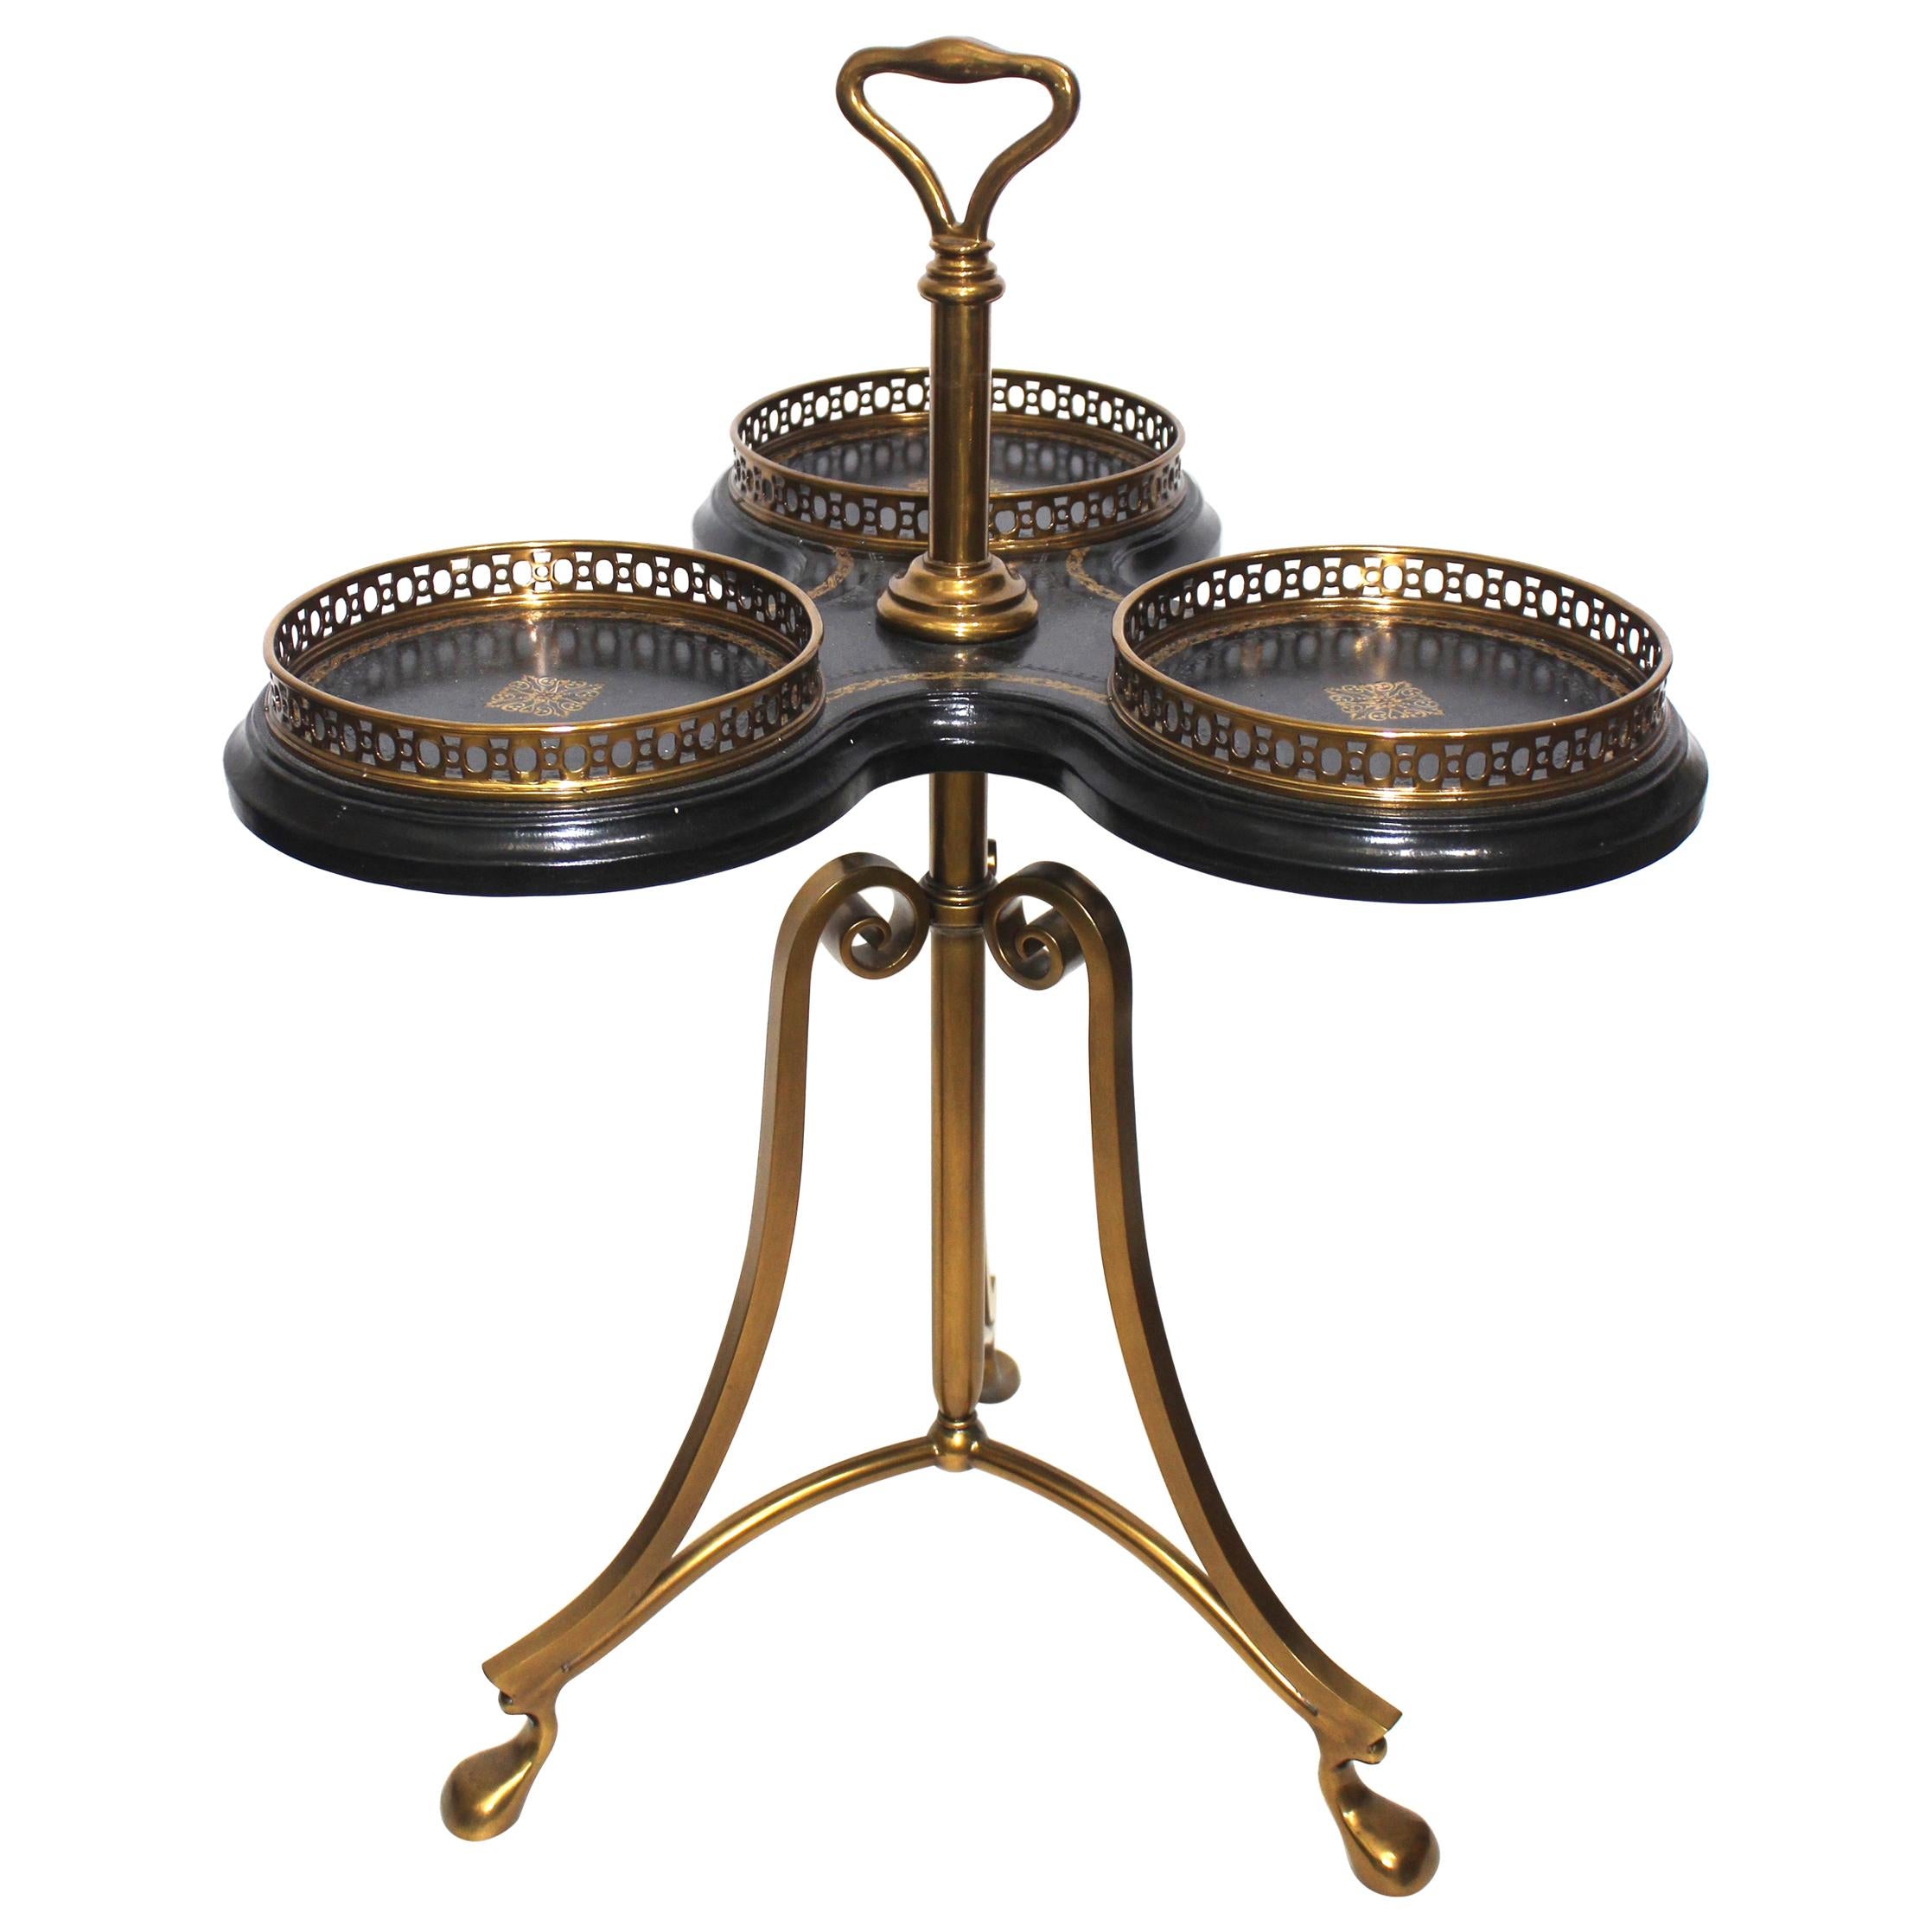 Neoclassical Trefoil Table by La Barge